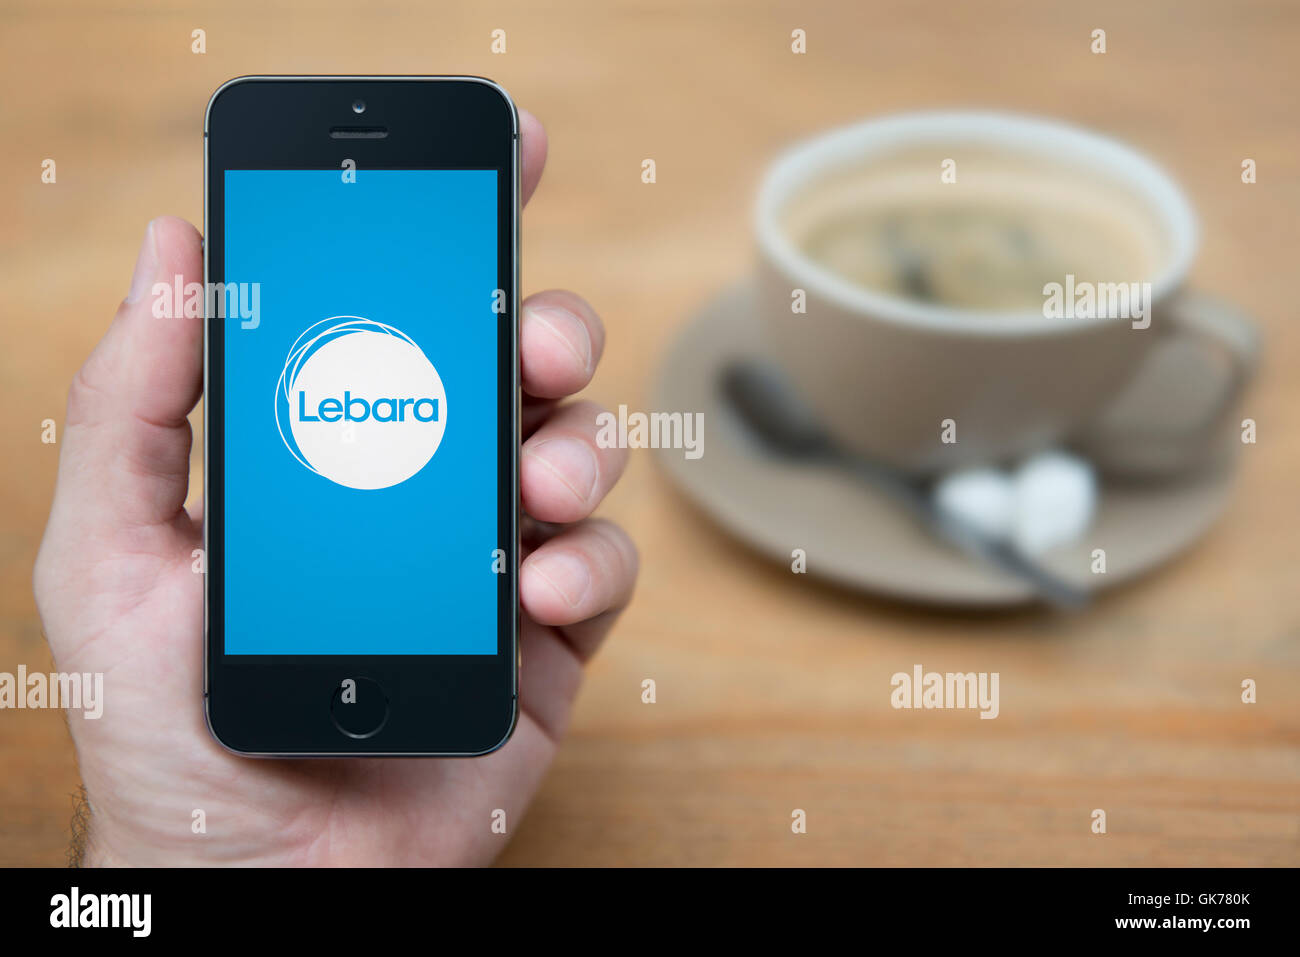 A man looks at his iPhone which displays the Lebara Mobile logo, while sat with a cup of coffee (Editorial use only). Stock Photo